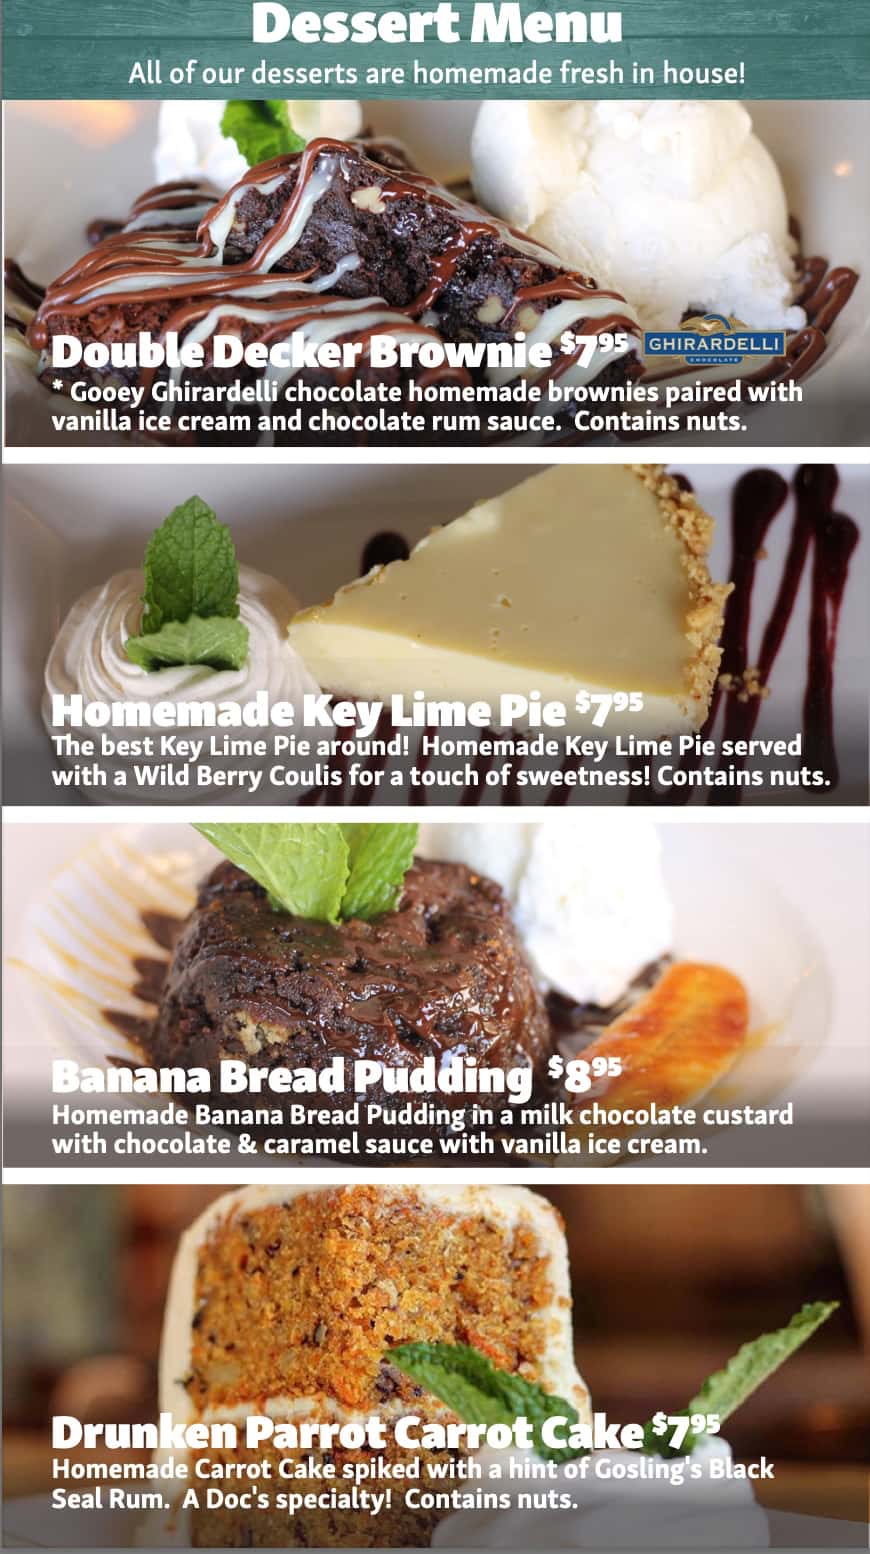 Doc Ford's Rum Bar and Grille Dessert Menu